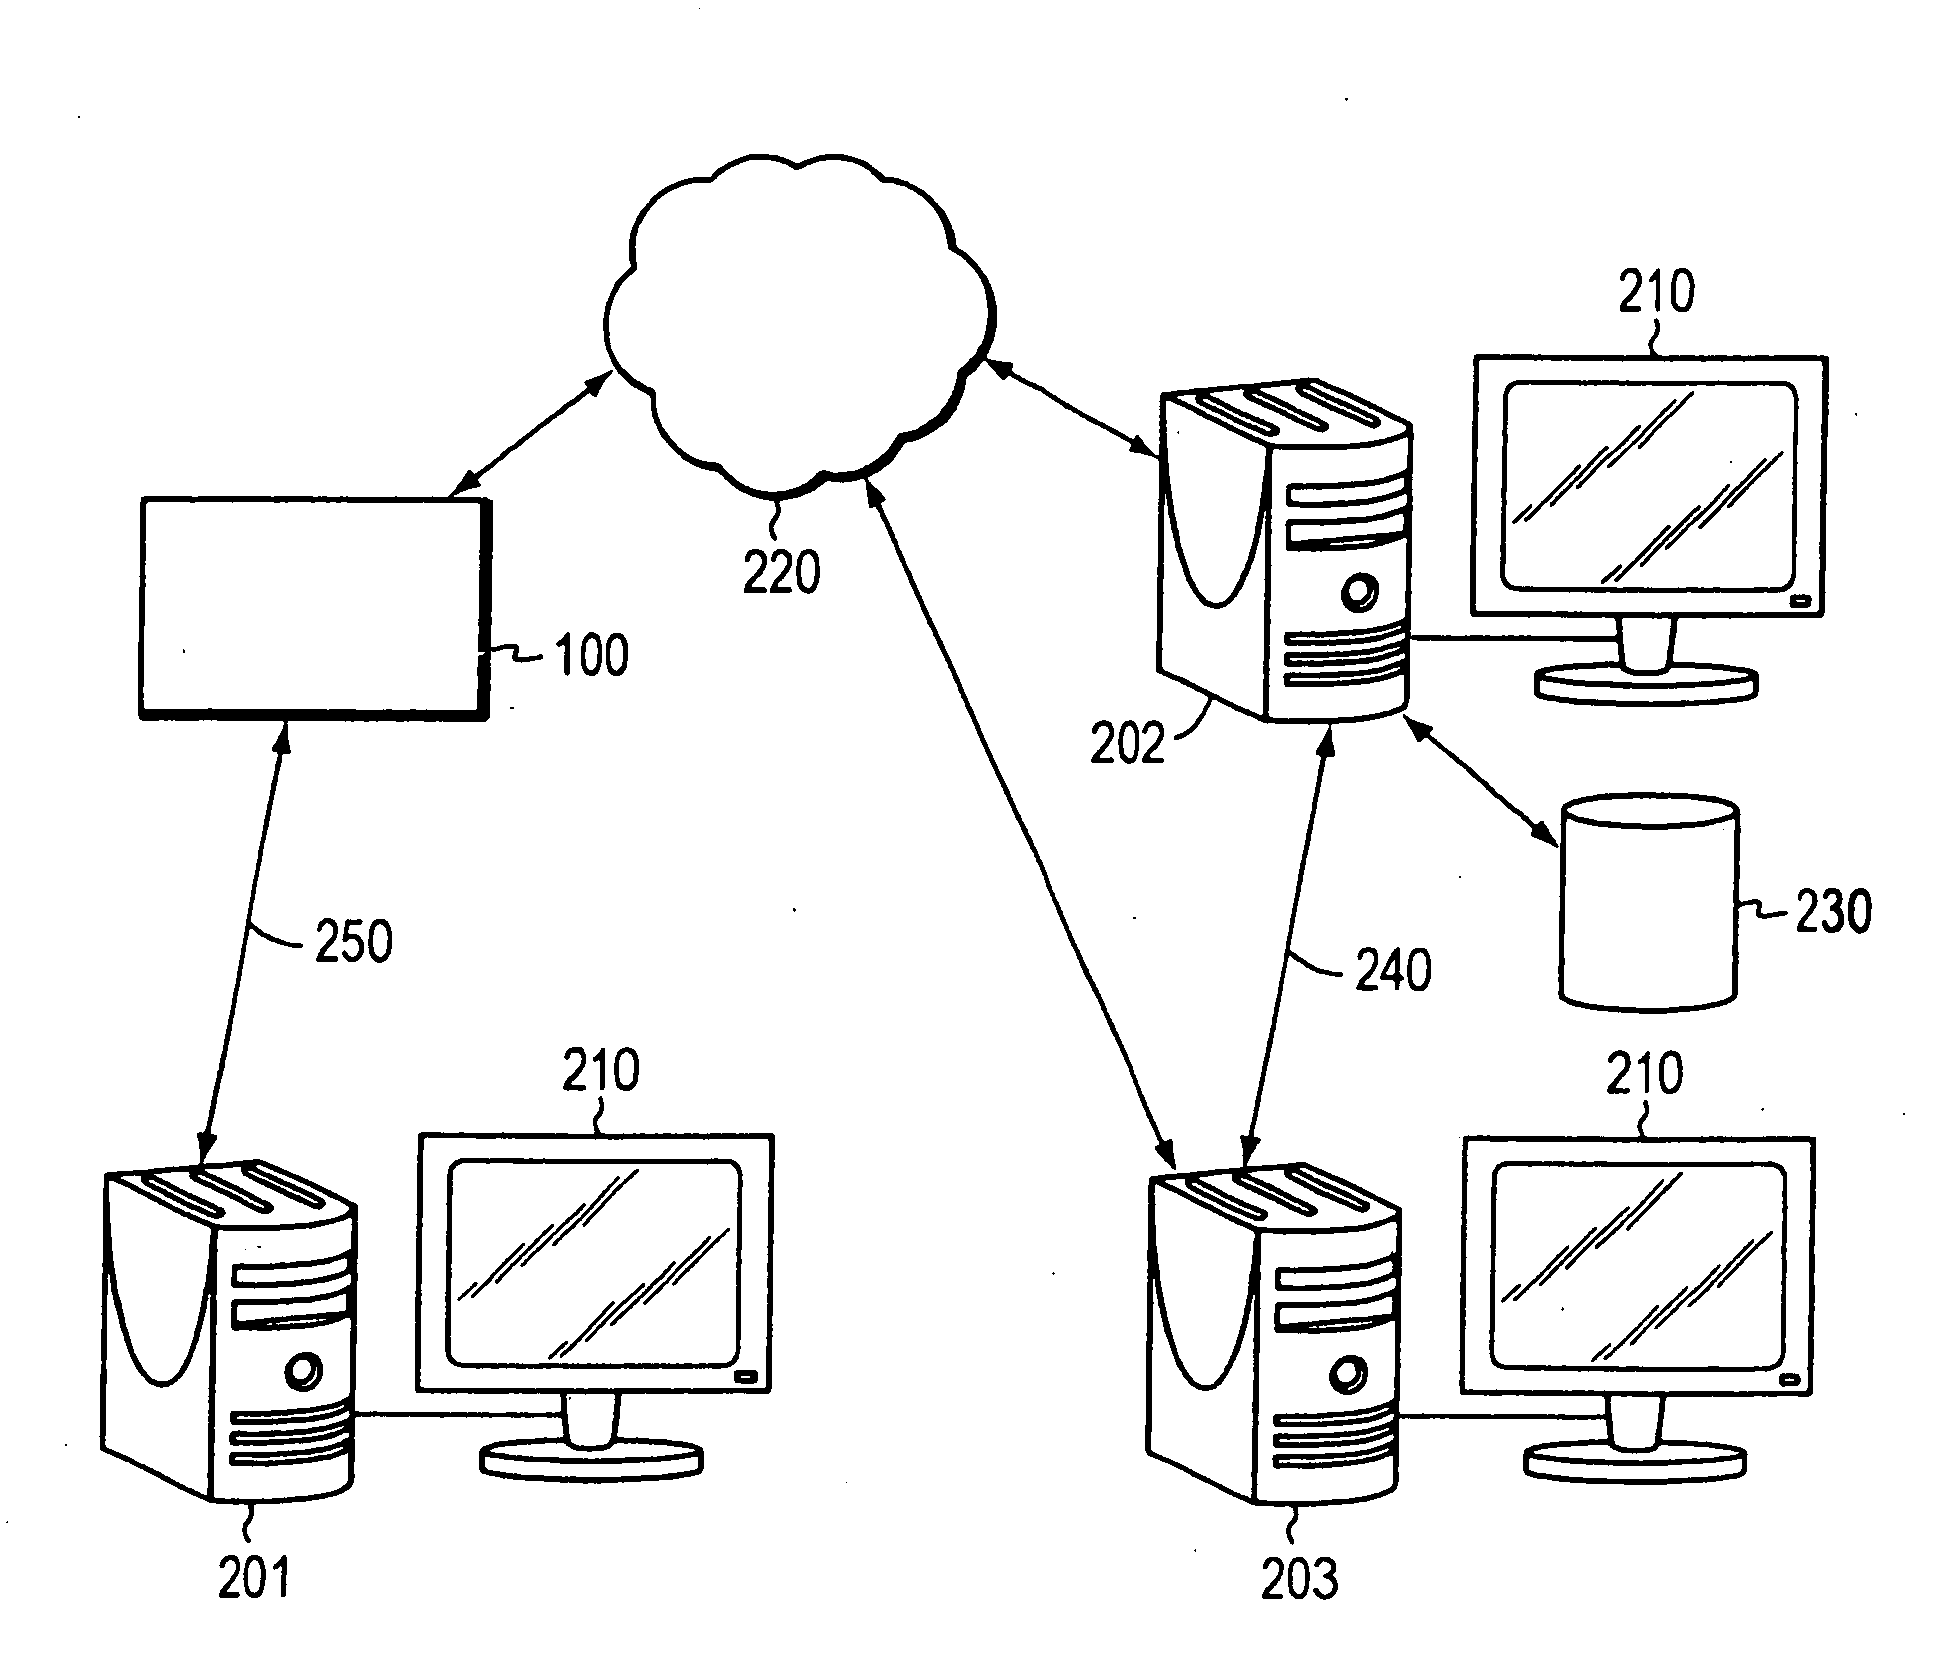 Bar code reading terminal with video capturing mode